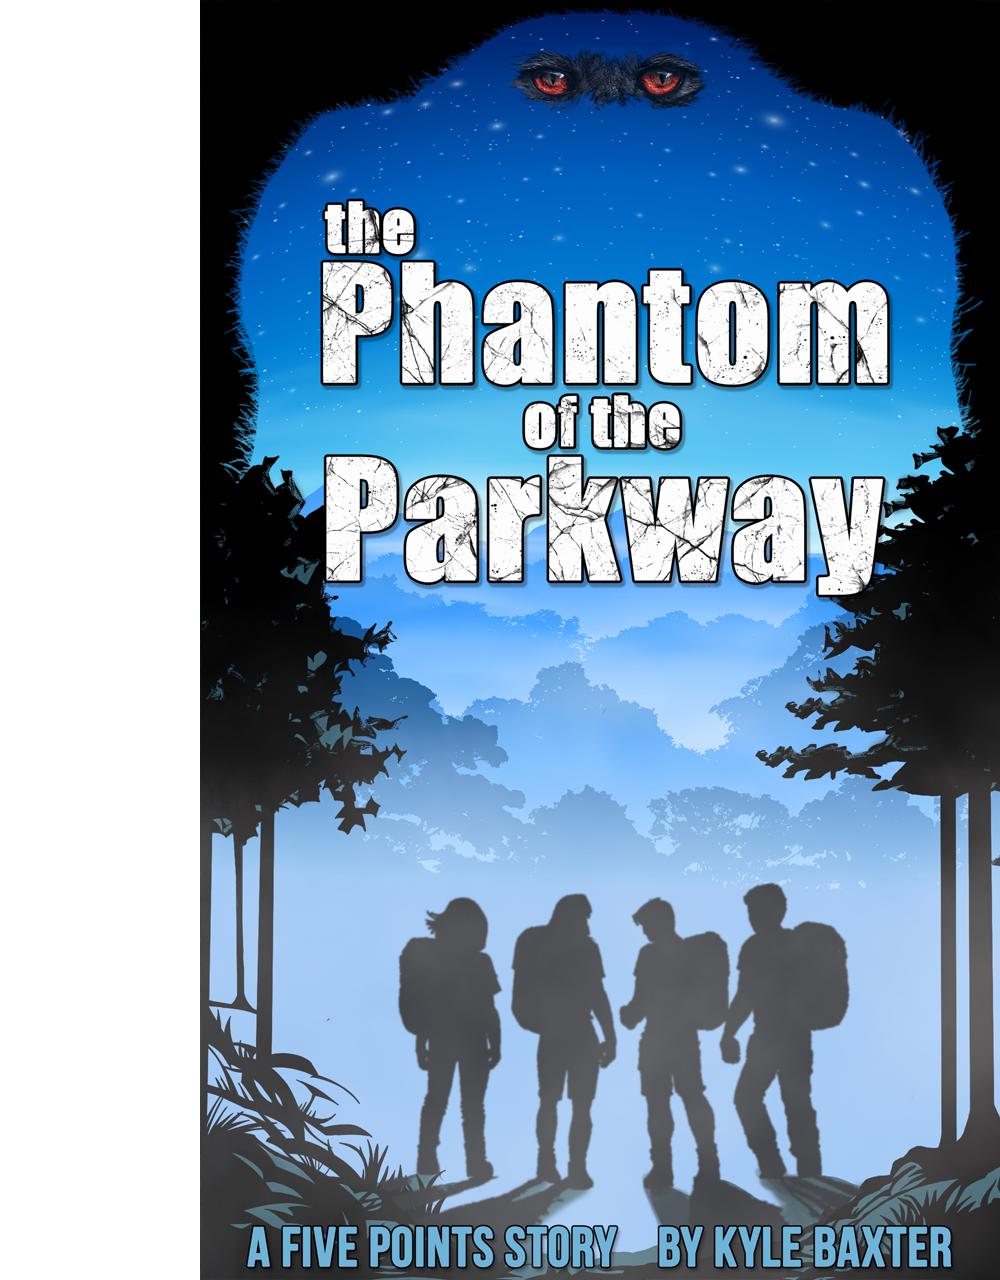 ebook cover of the Phantom of the Parkway